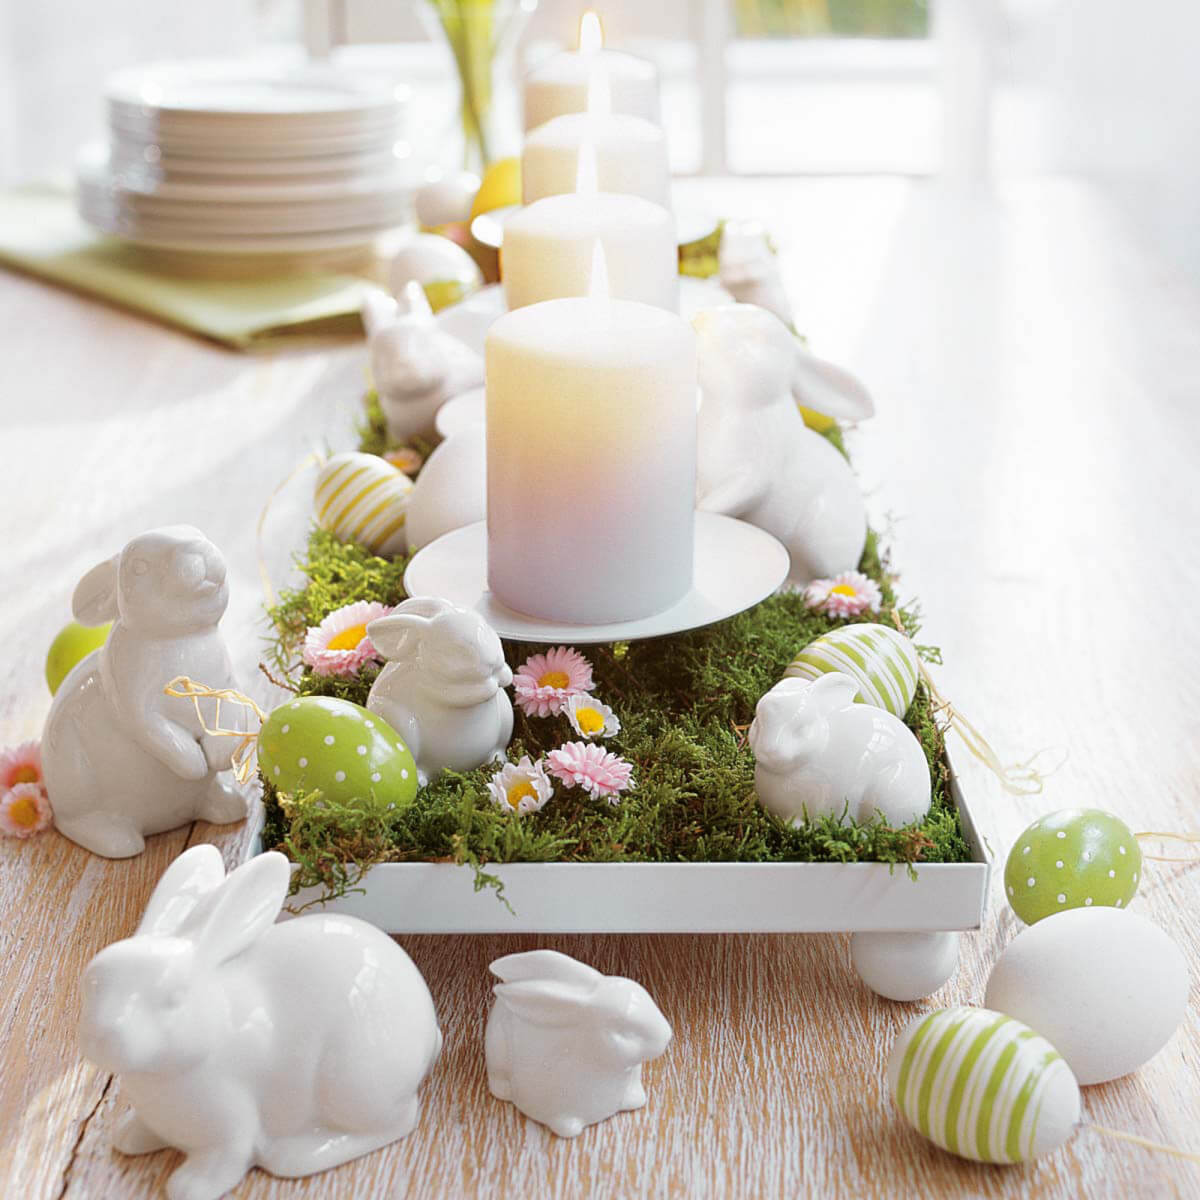 "At The Eater Bunny Hop" Centerpiece